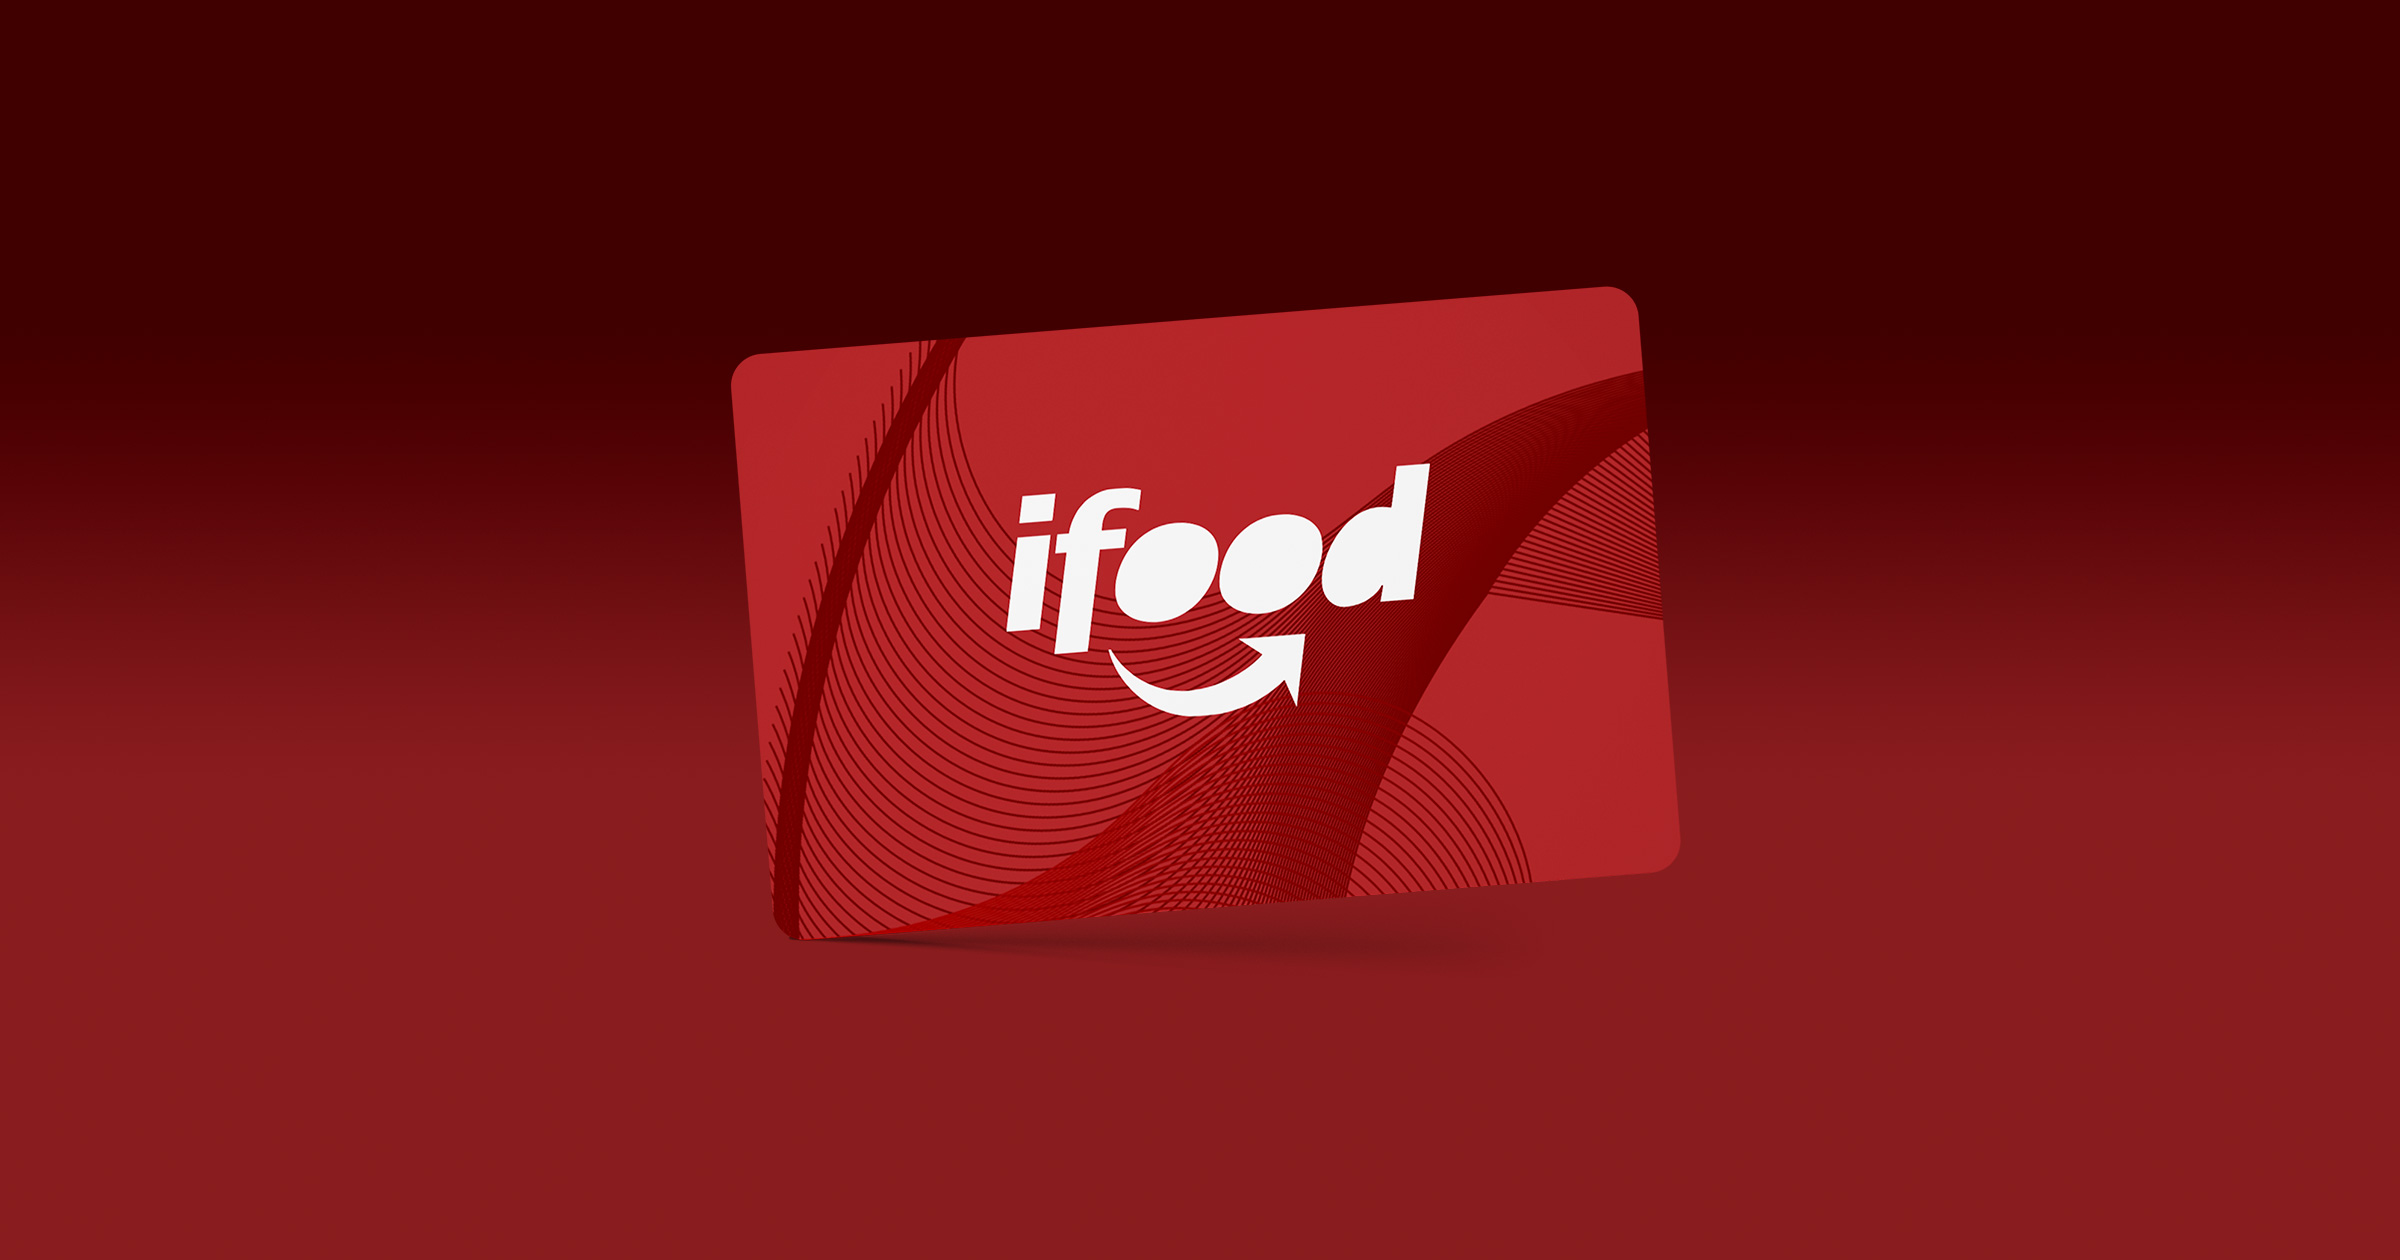 iFood BRL 50 Gift Card BR 12.09 USD